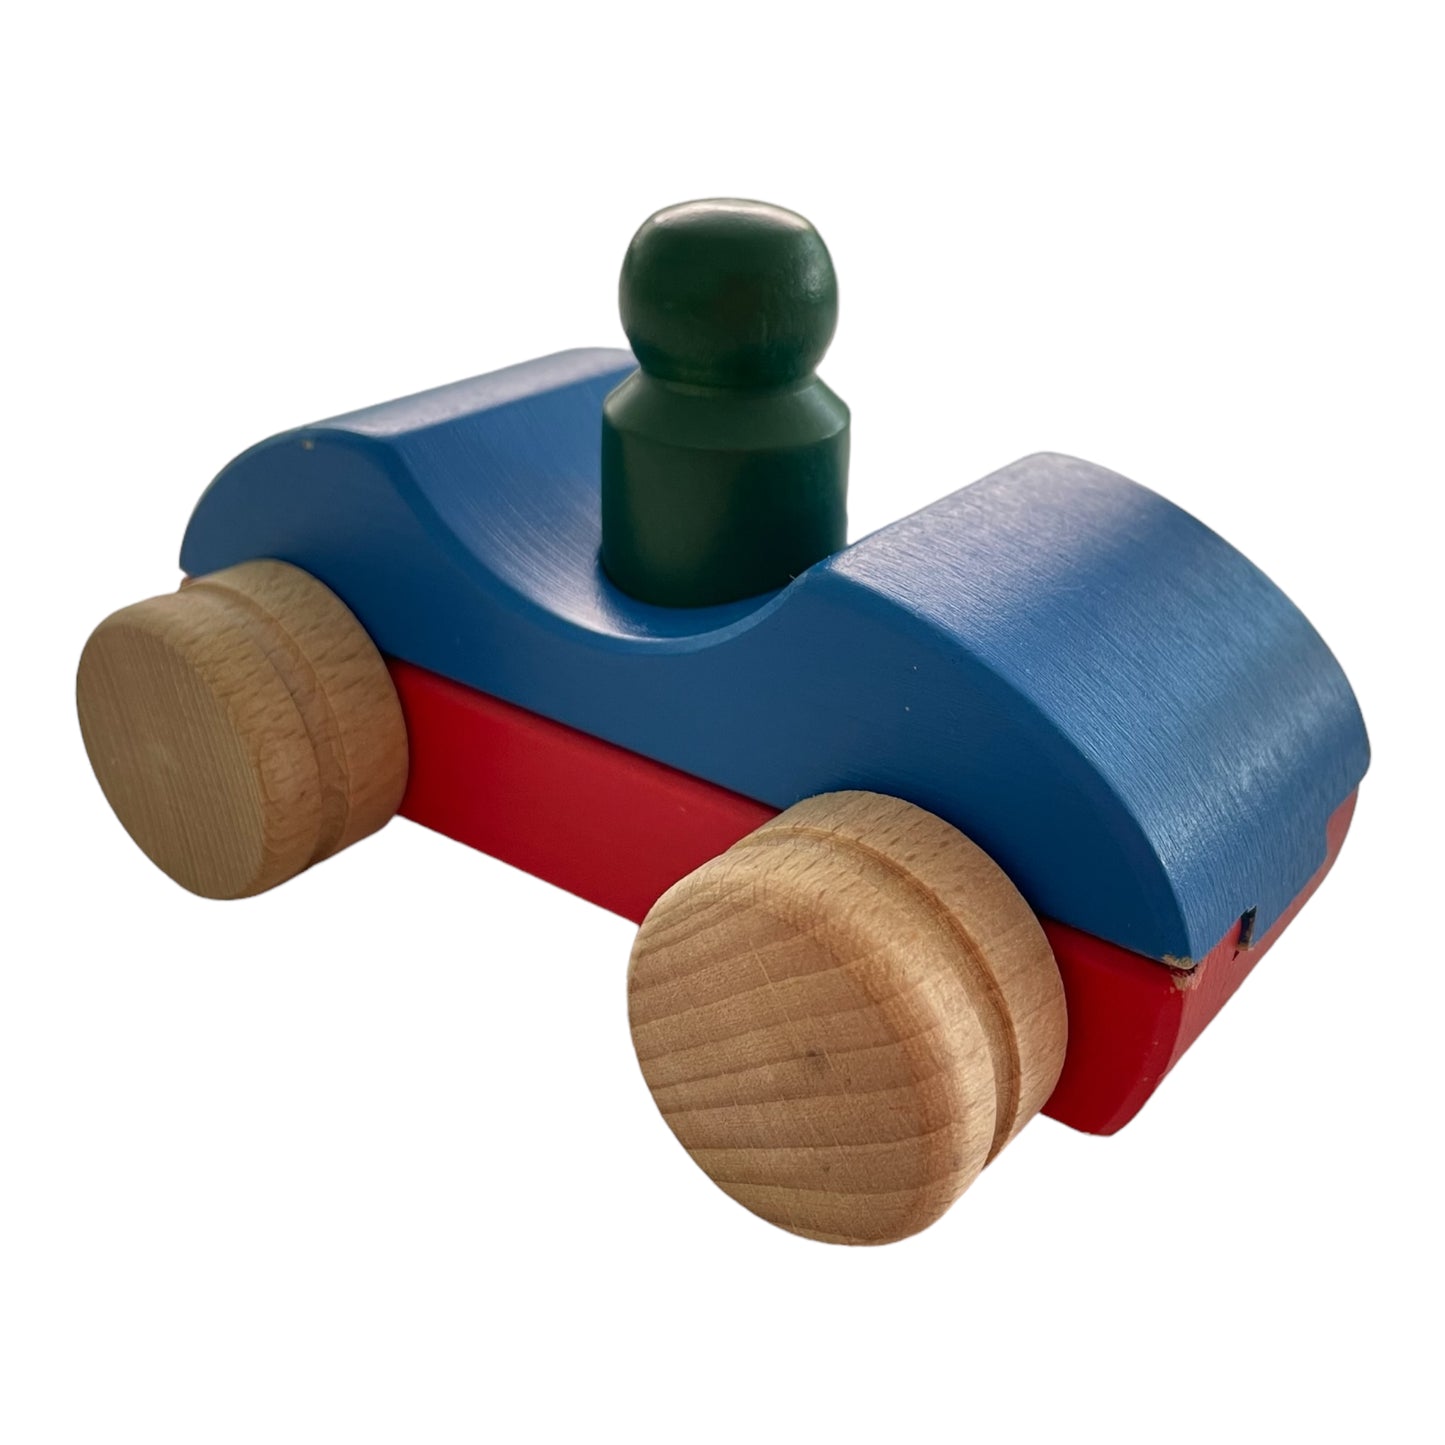 Wooden Toy Car to assemble